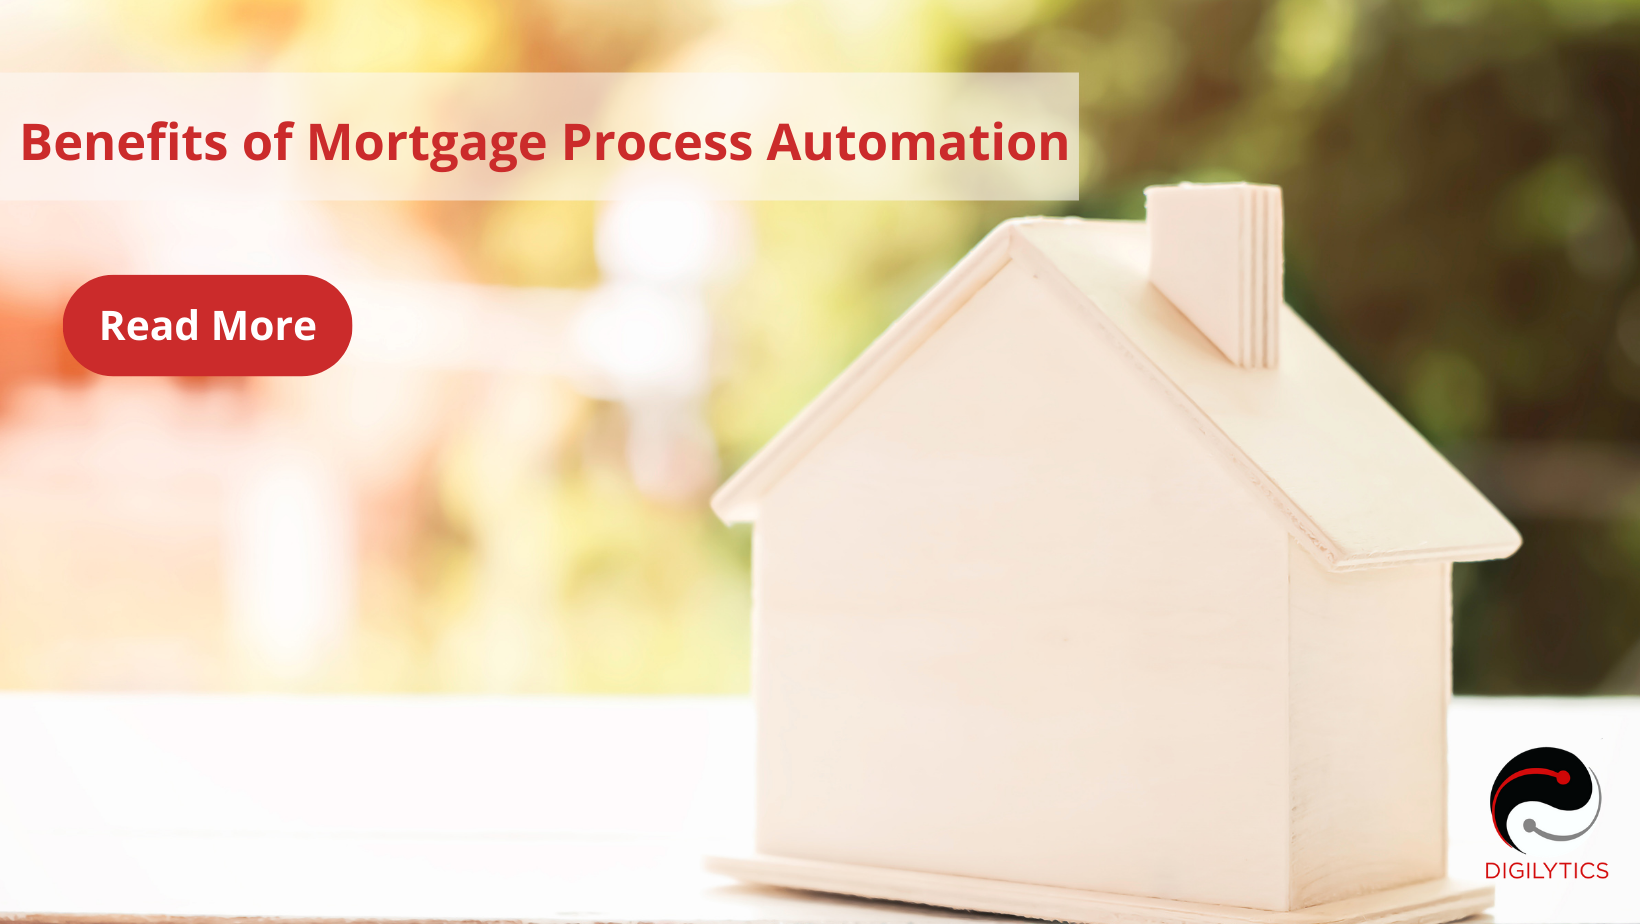 Benefits of Mortgage Process Automation